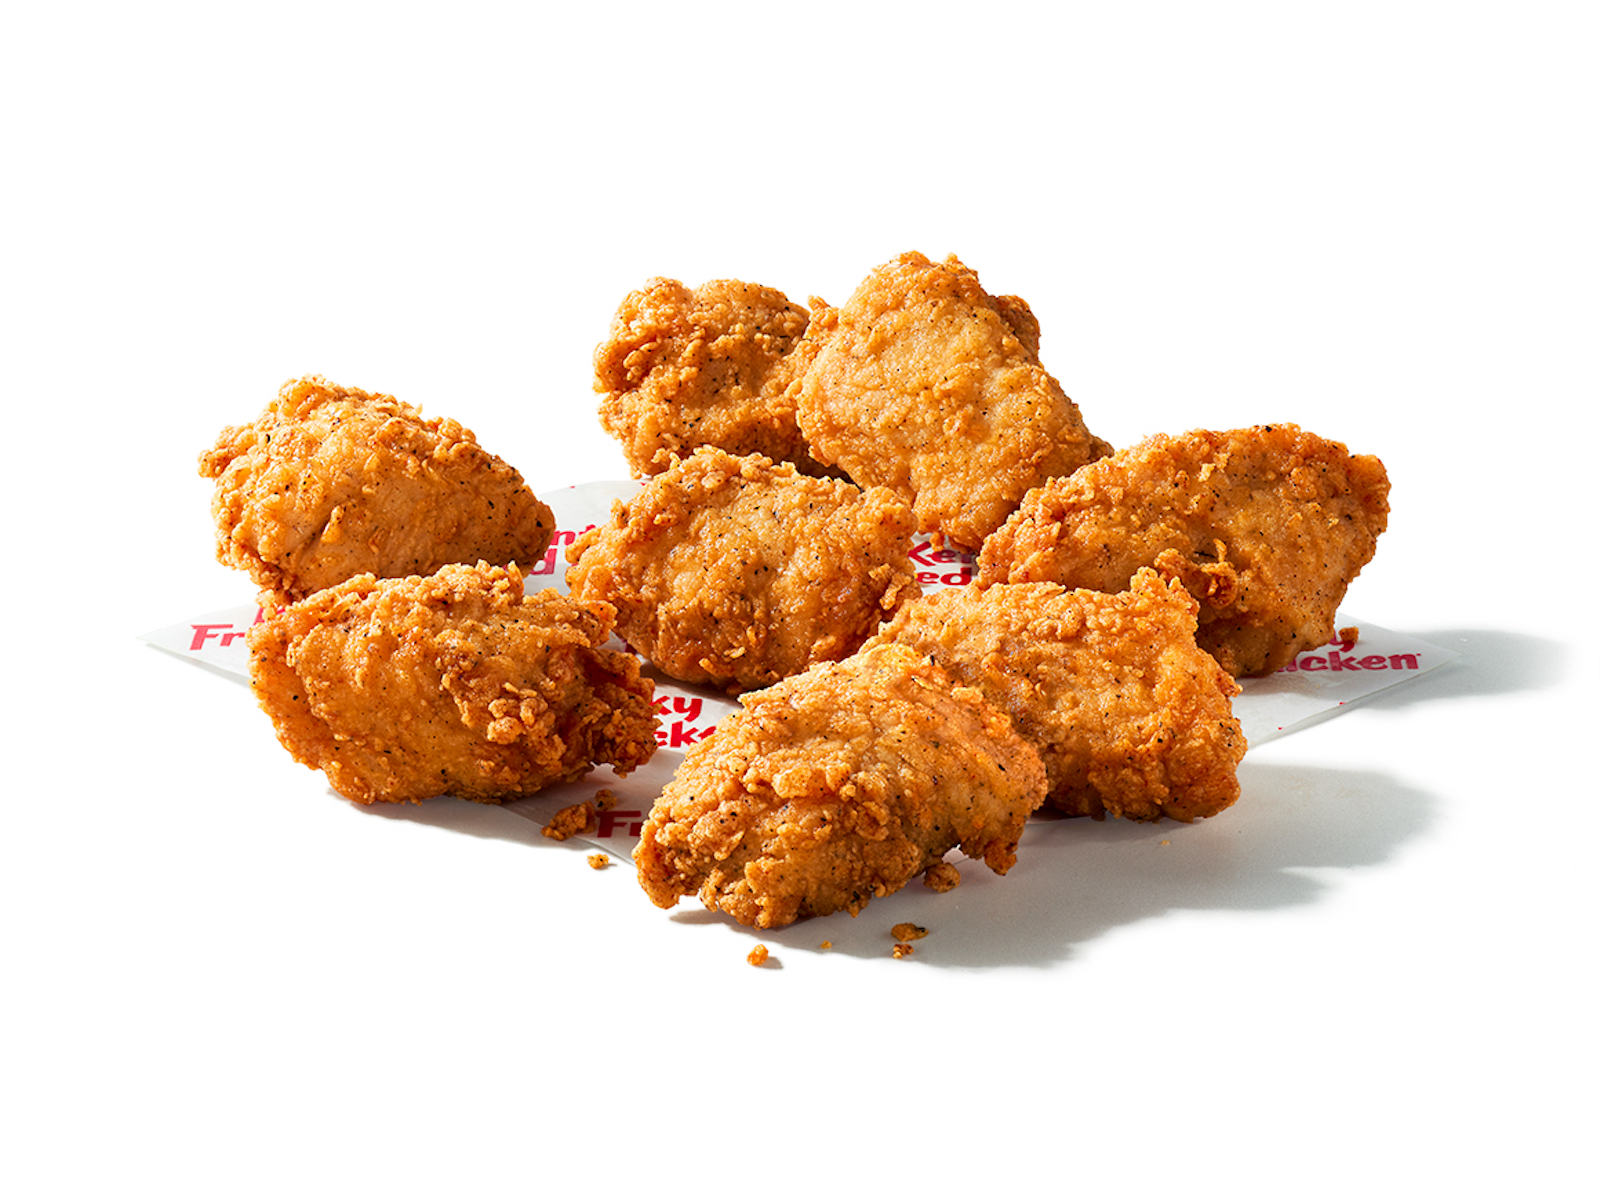 low-calorie fast food: KFC 8-piece Chicken Nuggets